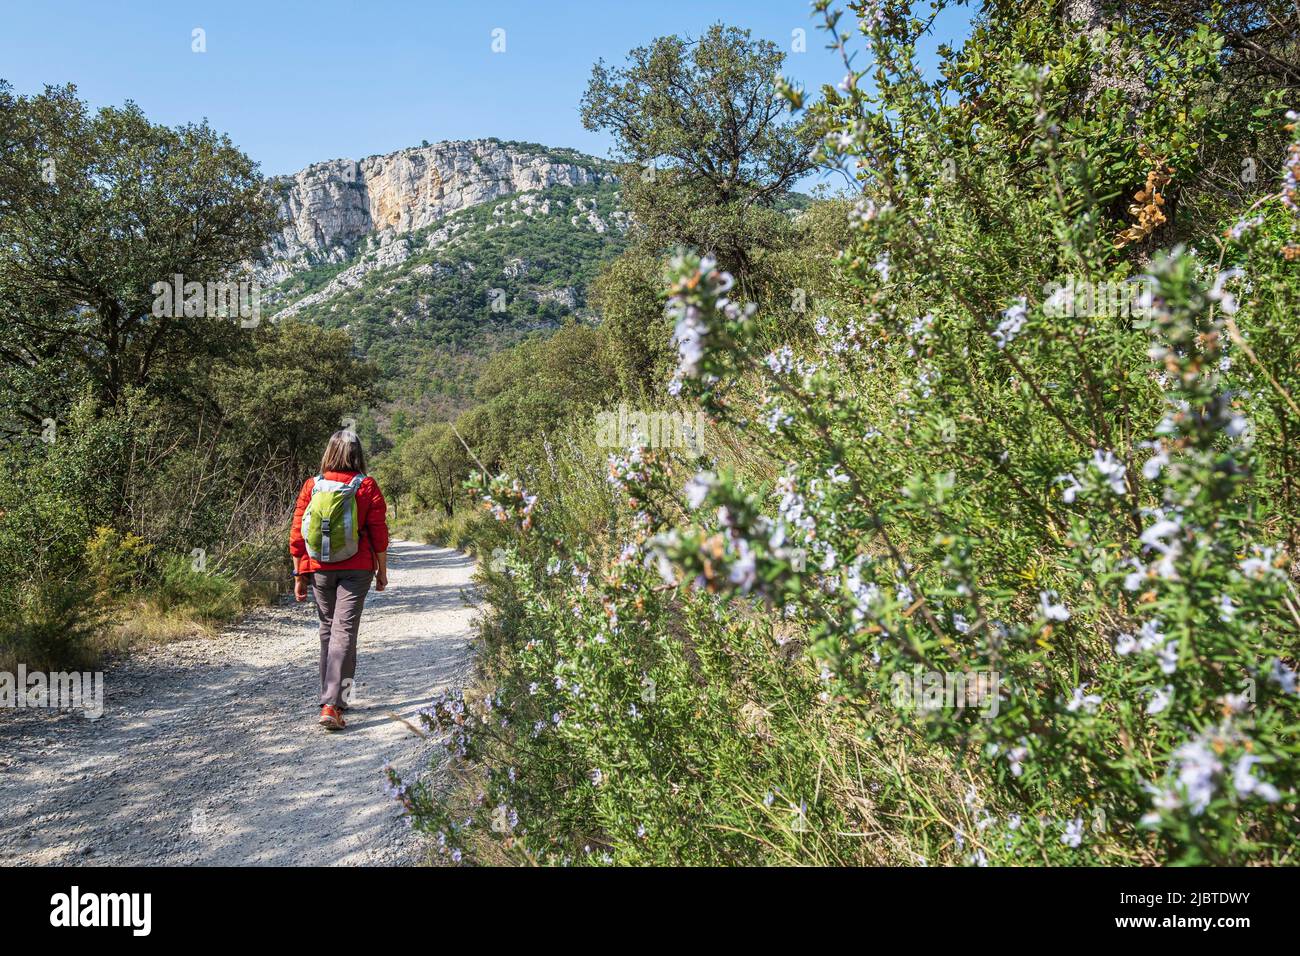 France, Vaucluse, Luberon Regional Natural Park, Mirabeau, hike along the Durance river Stock Photo